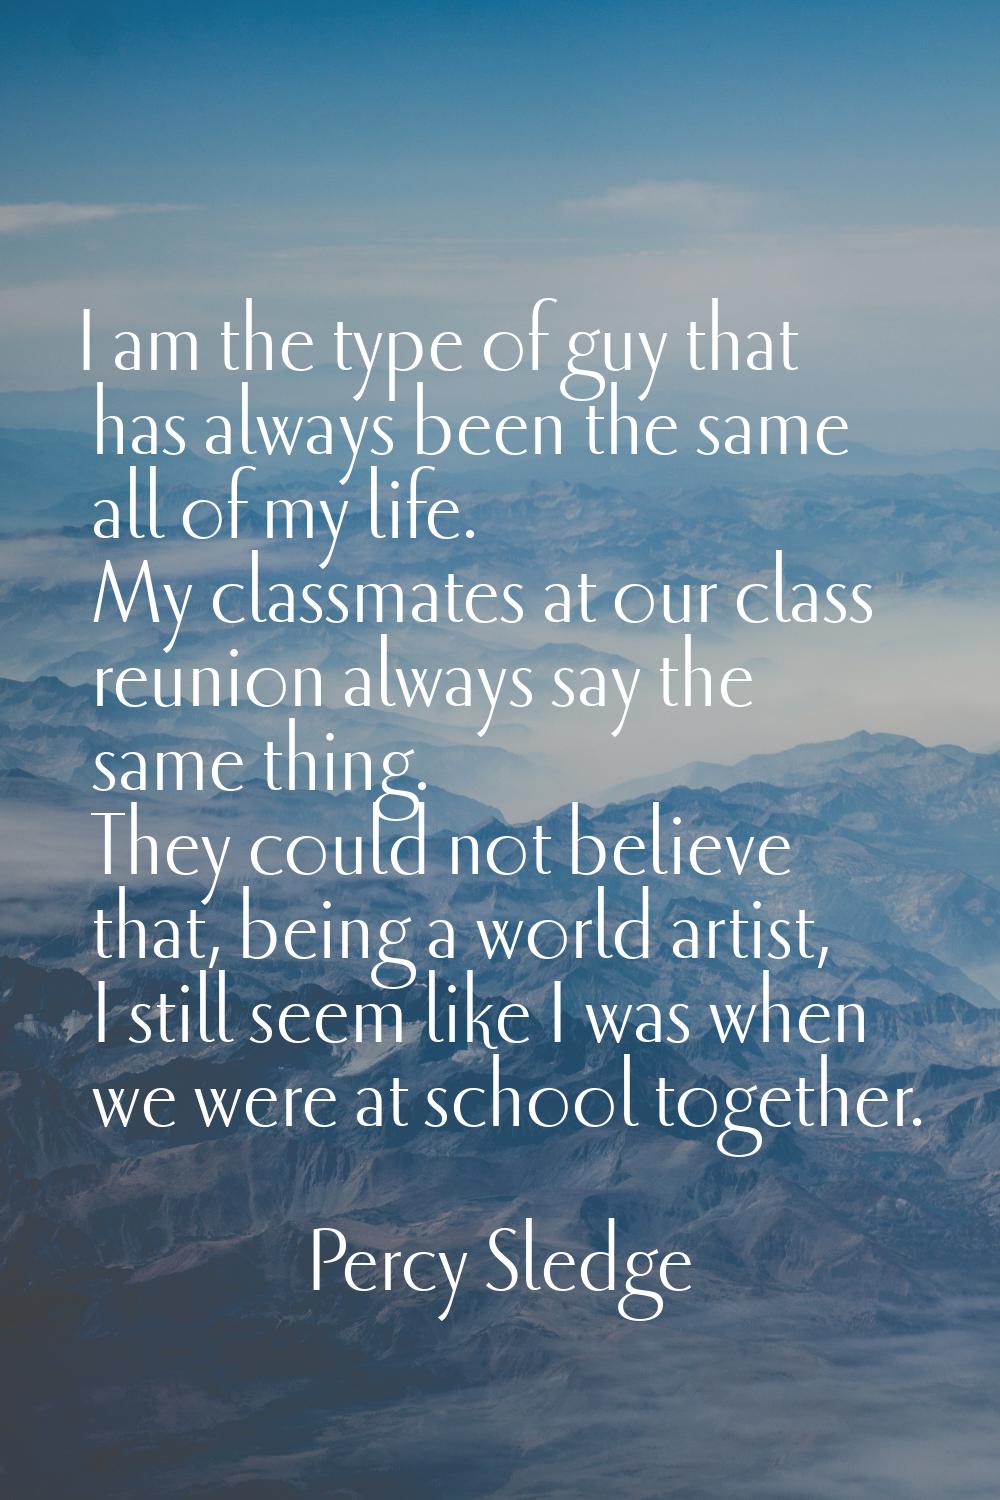 I am the type of guy that has always been the same all of my life. My classmates at our class reuni